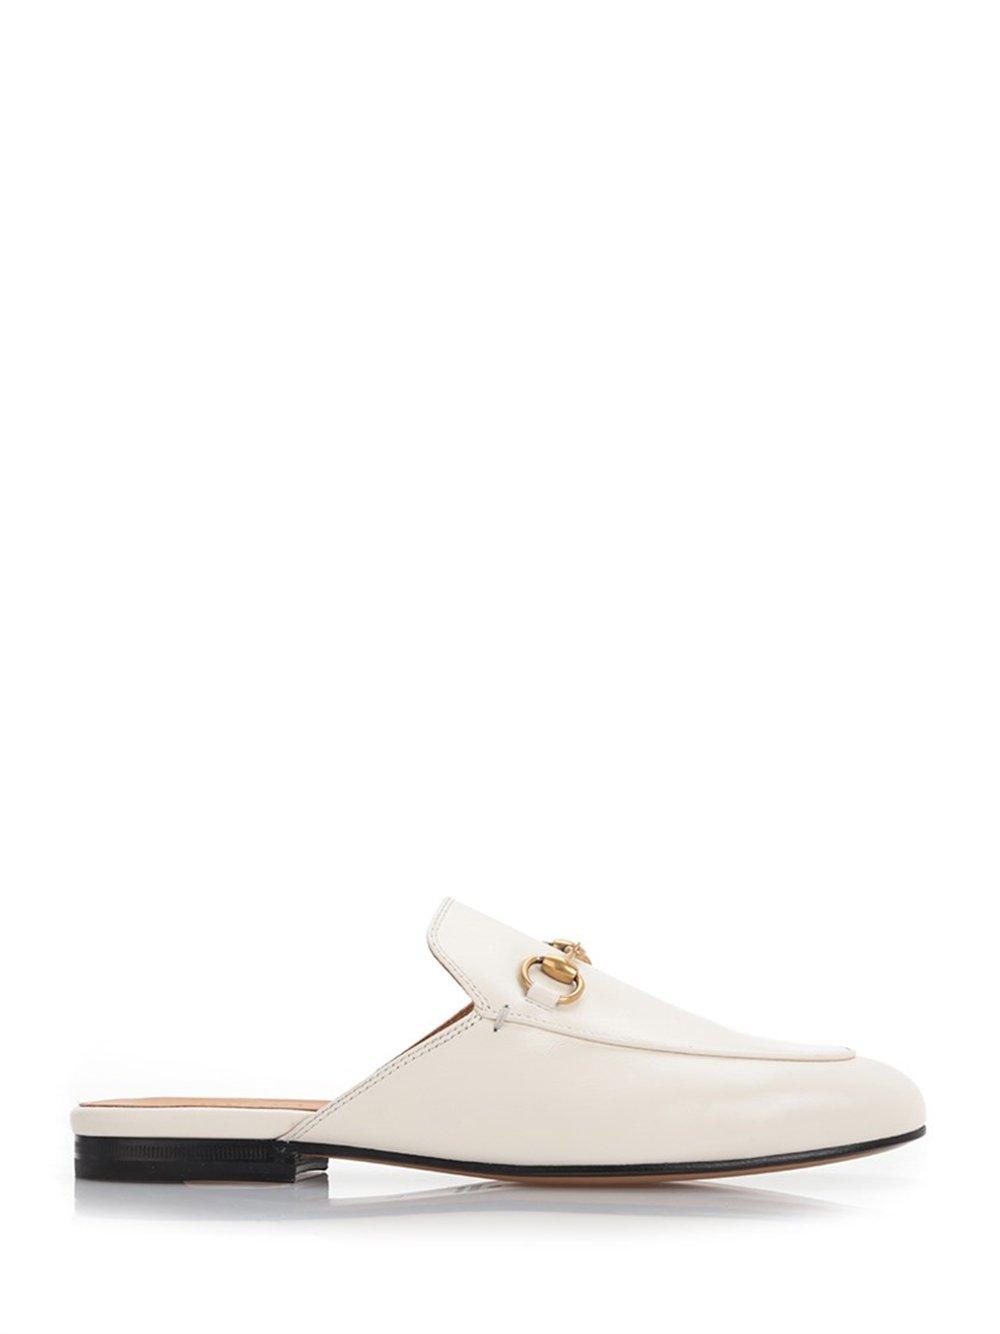 Gucci Leather Princetown Mules in White - Lyst